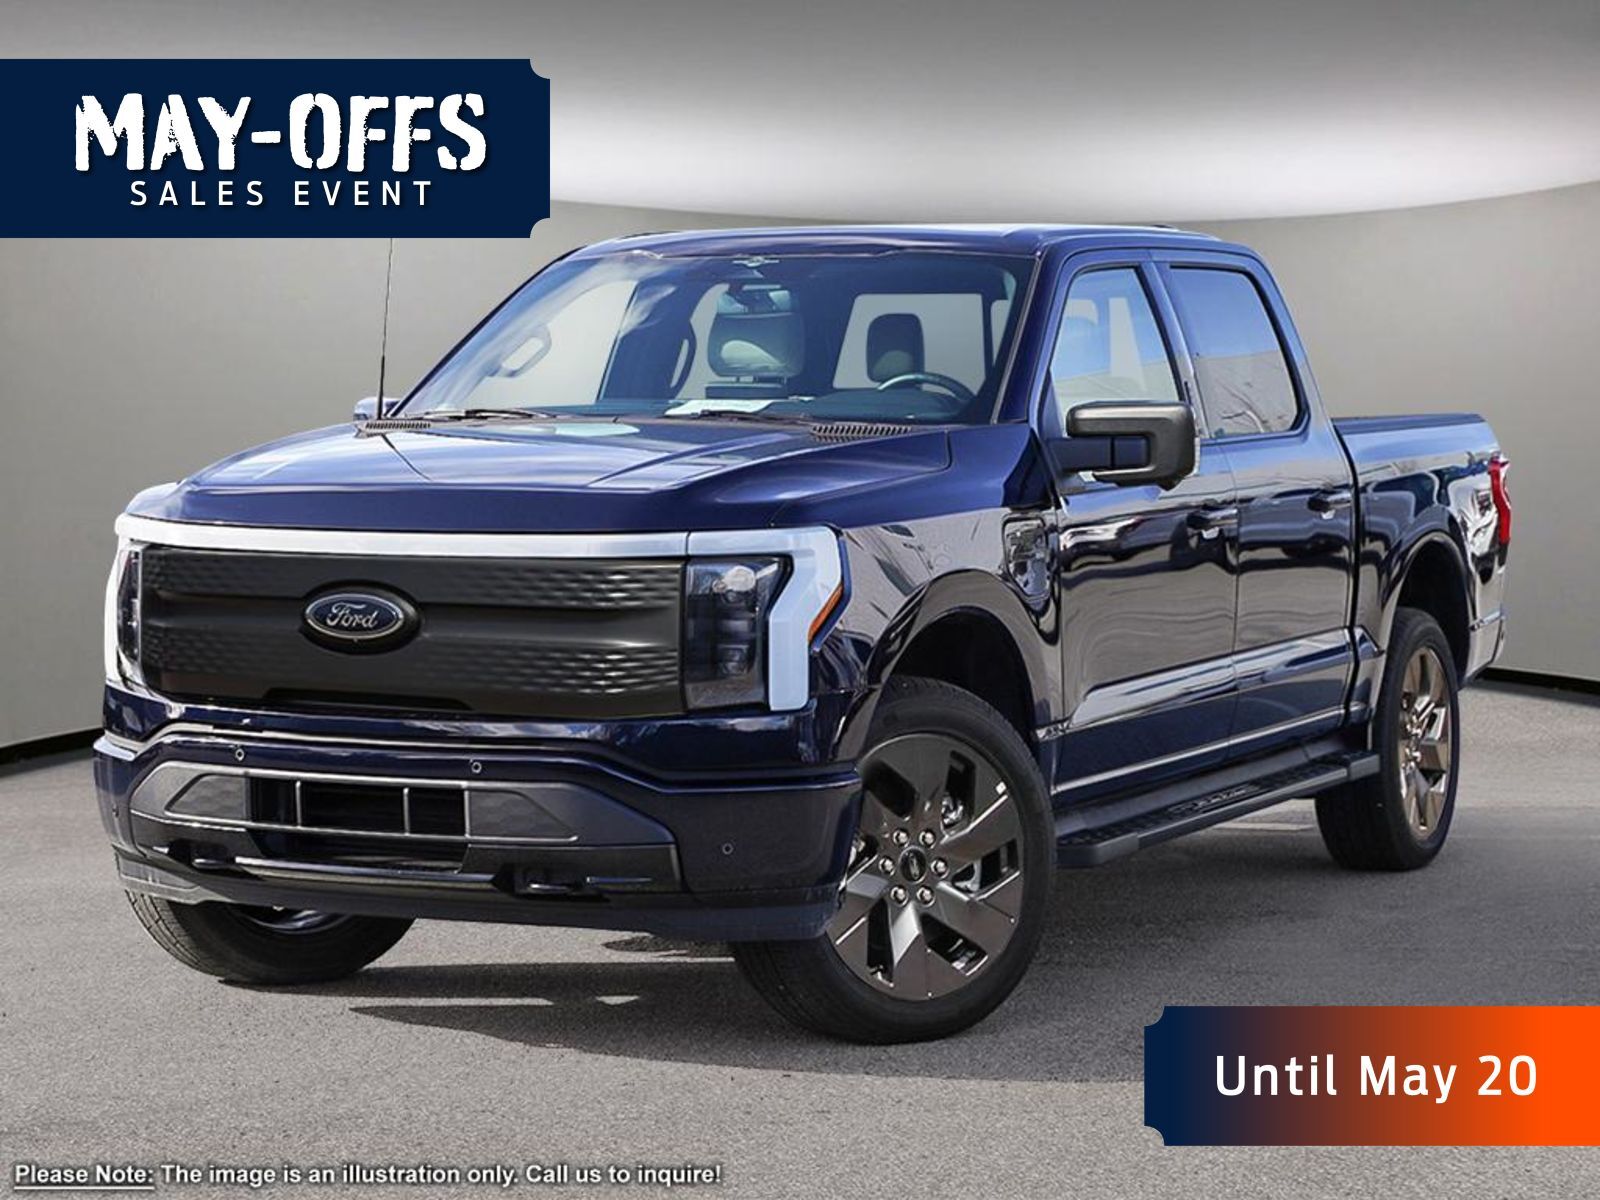 2023 Ford F-150 Lightning EXT RANGE BTTRY, XLT SERIES, FORDPASS, HEATED SEAT